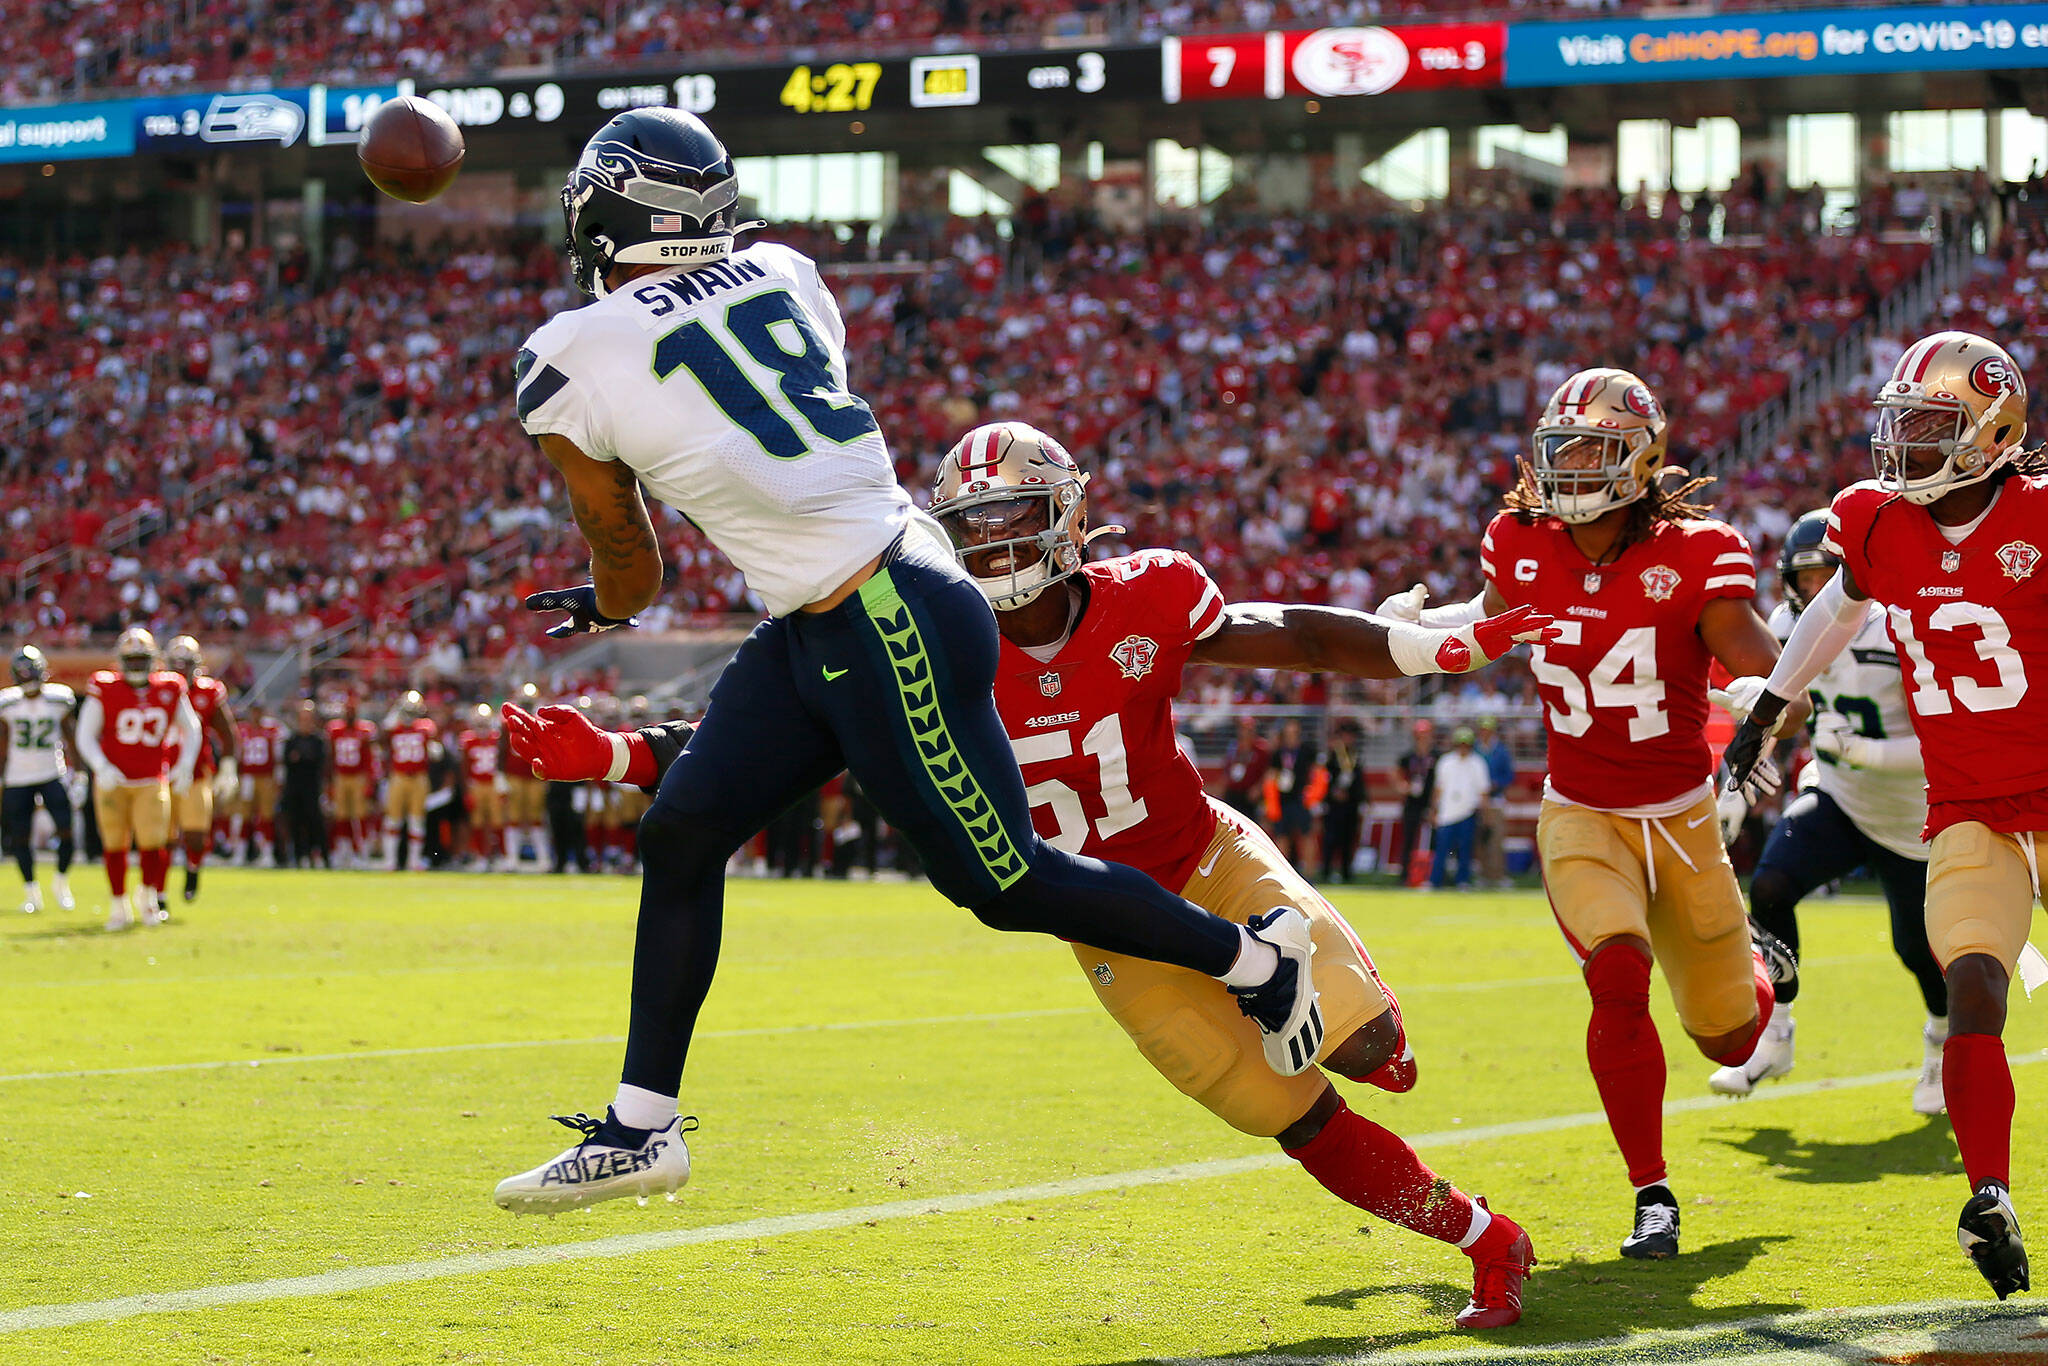 Seattle Seahawks wide receiver Freddie Swain (18) catches a touchdown pass against San Francisco 49ers linebacker Azeez Al-Shaair (51) during the second half of Sunday’s game in Santa Clara, Calif. (AP Photo/Jed Jacobsohn)